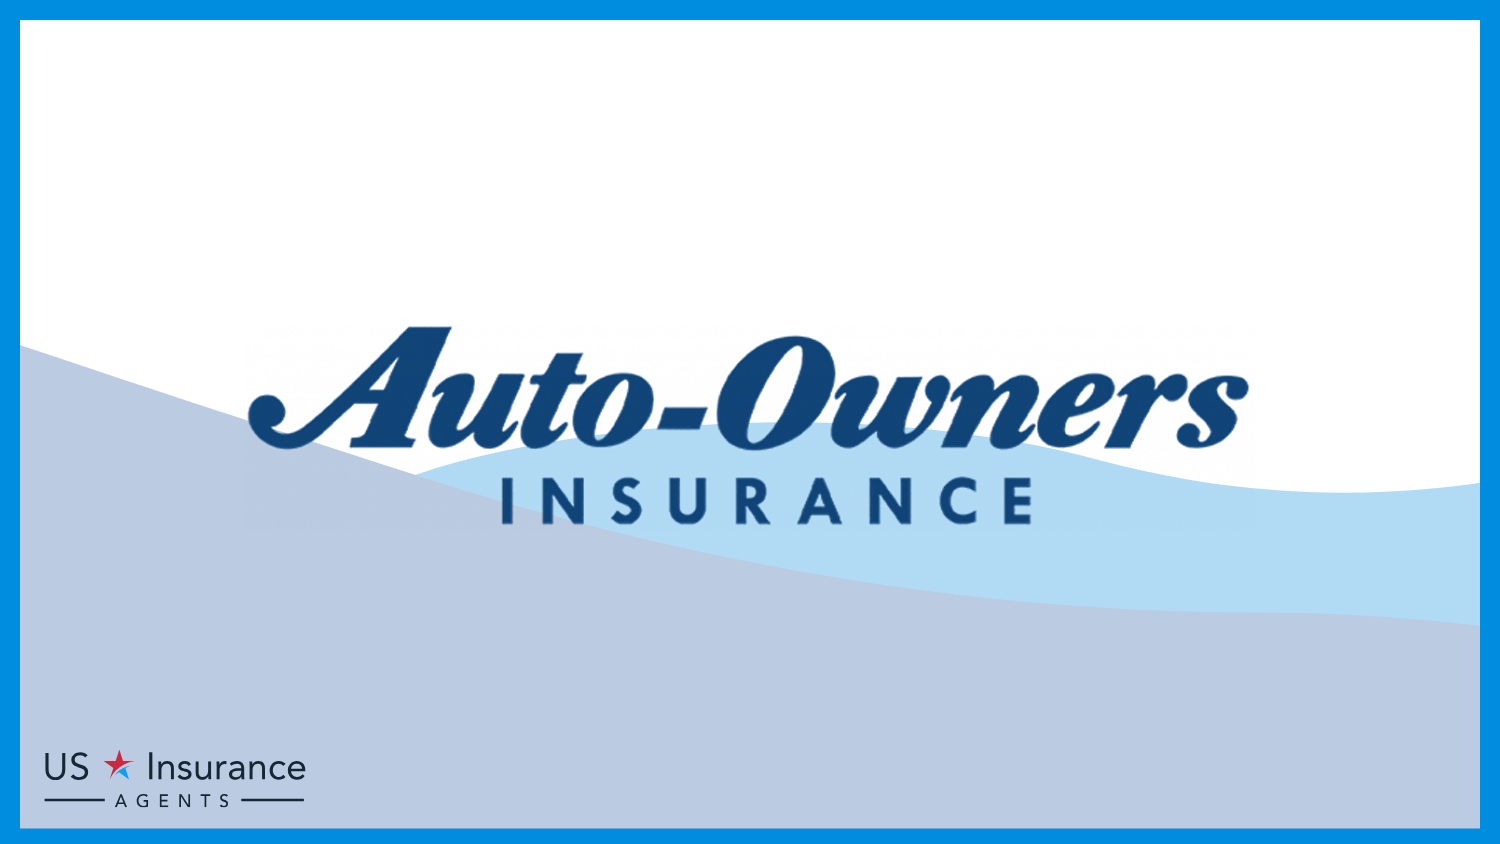 Auto-Owners: Best Business Insurance for Record Stores